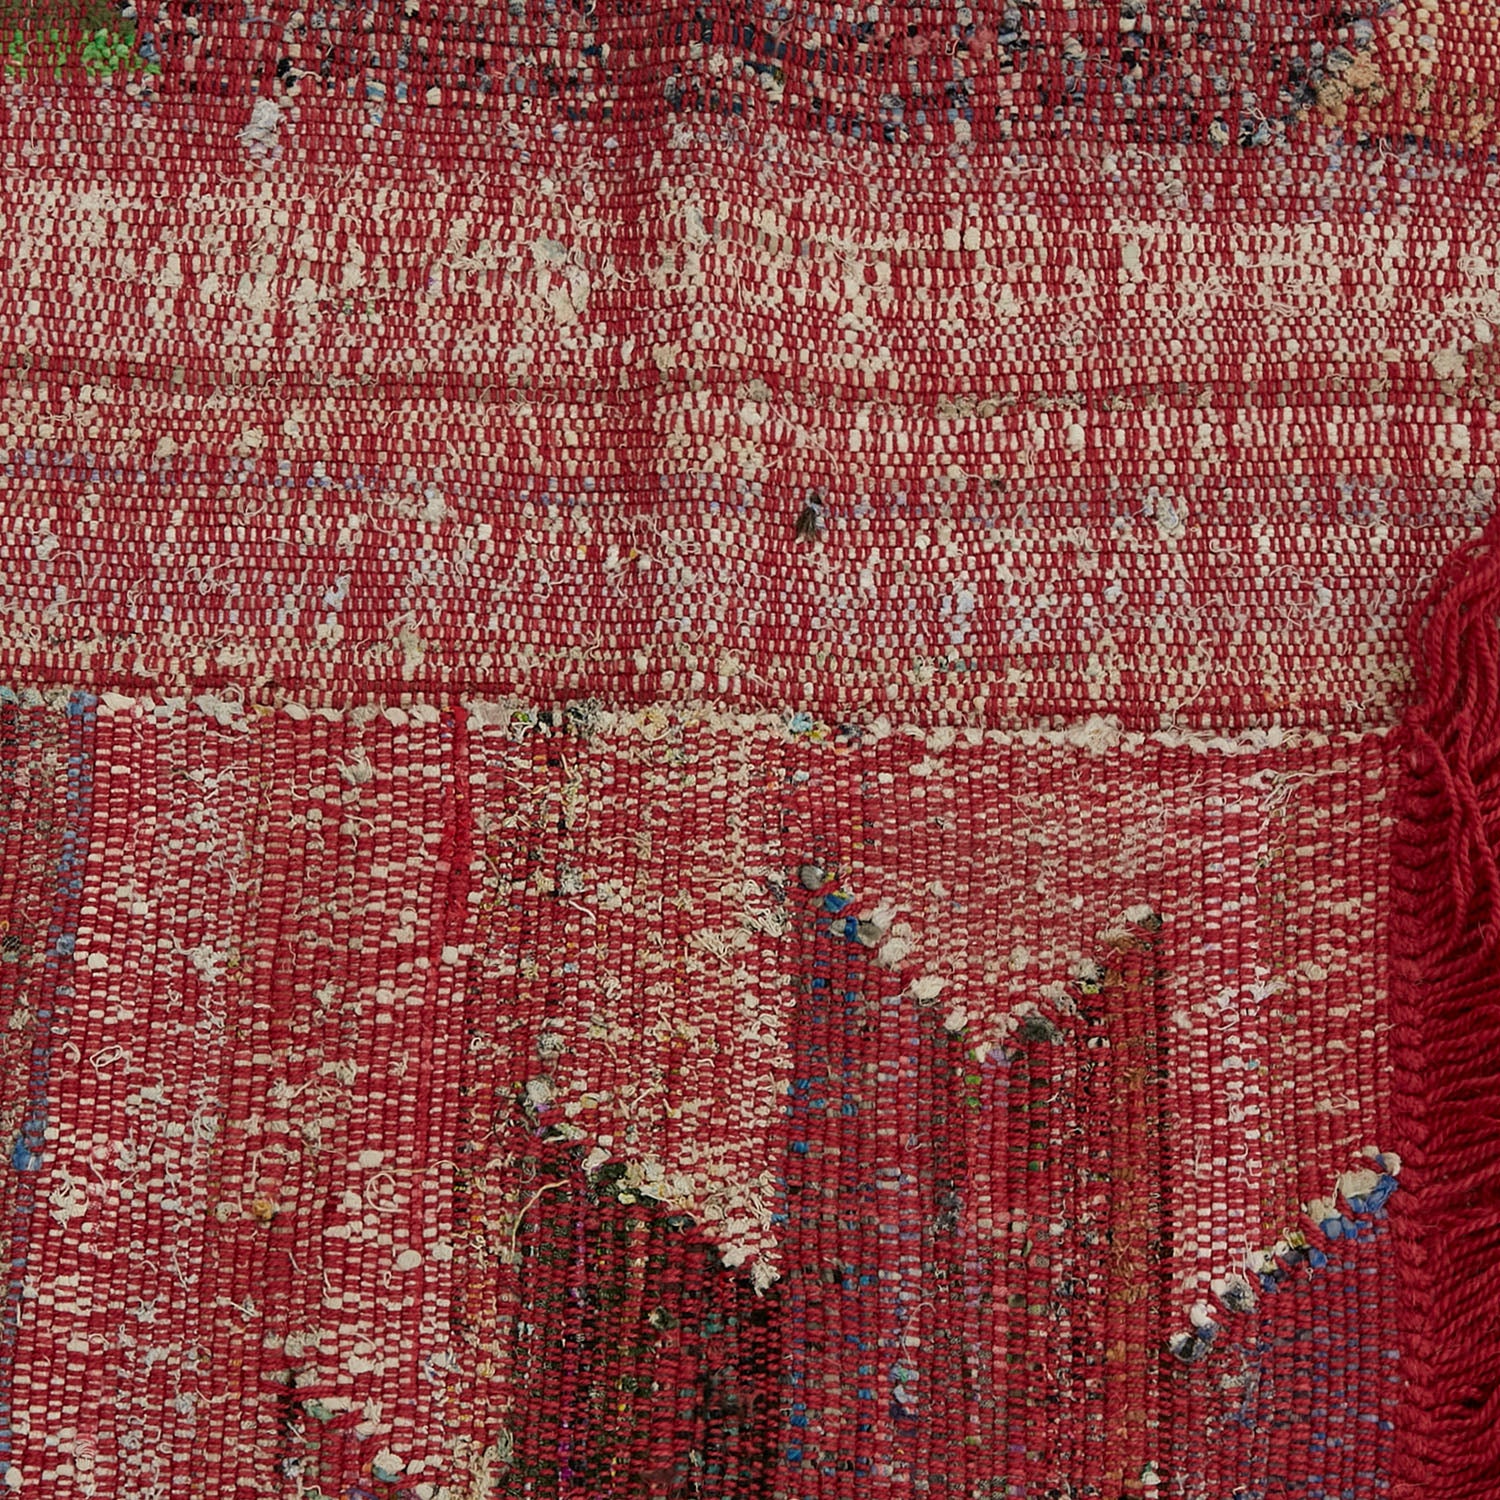 Close-up of red, white, and blue mottled fabric with fringed edge.